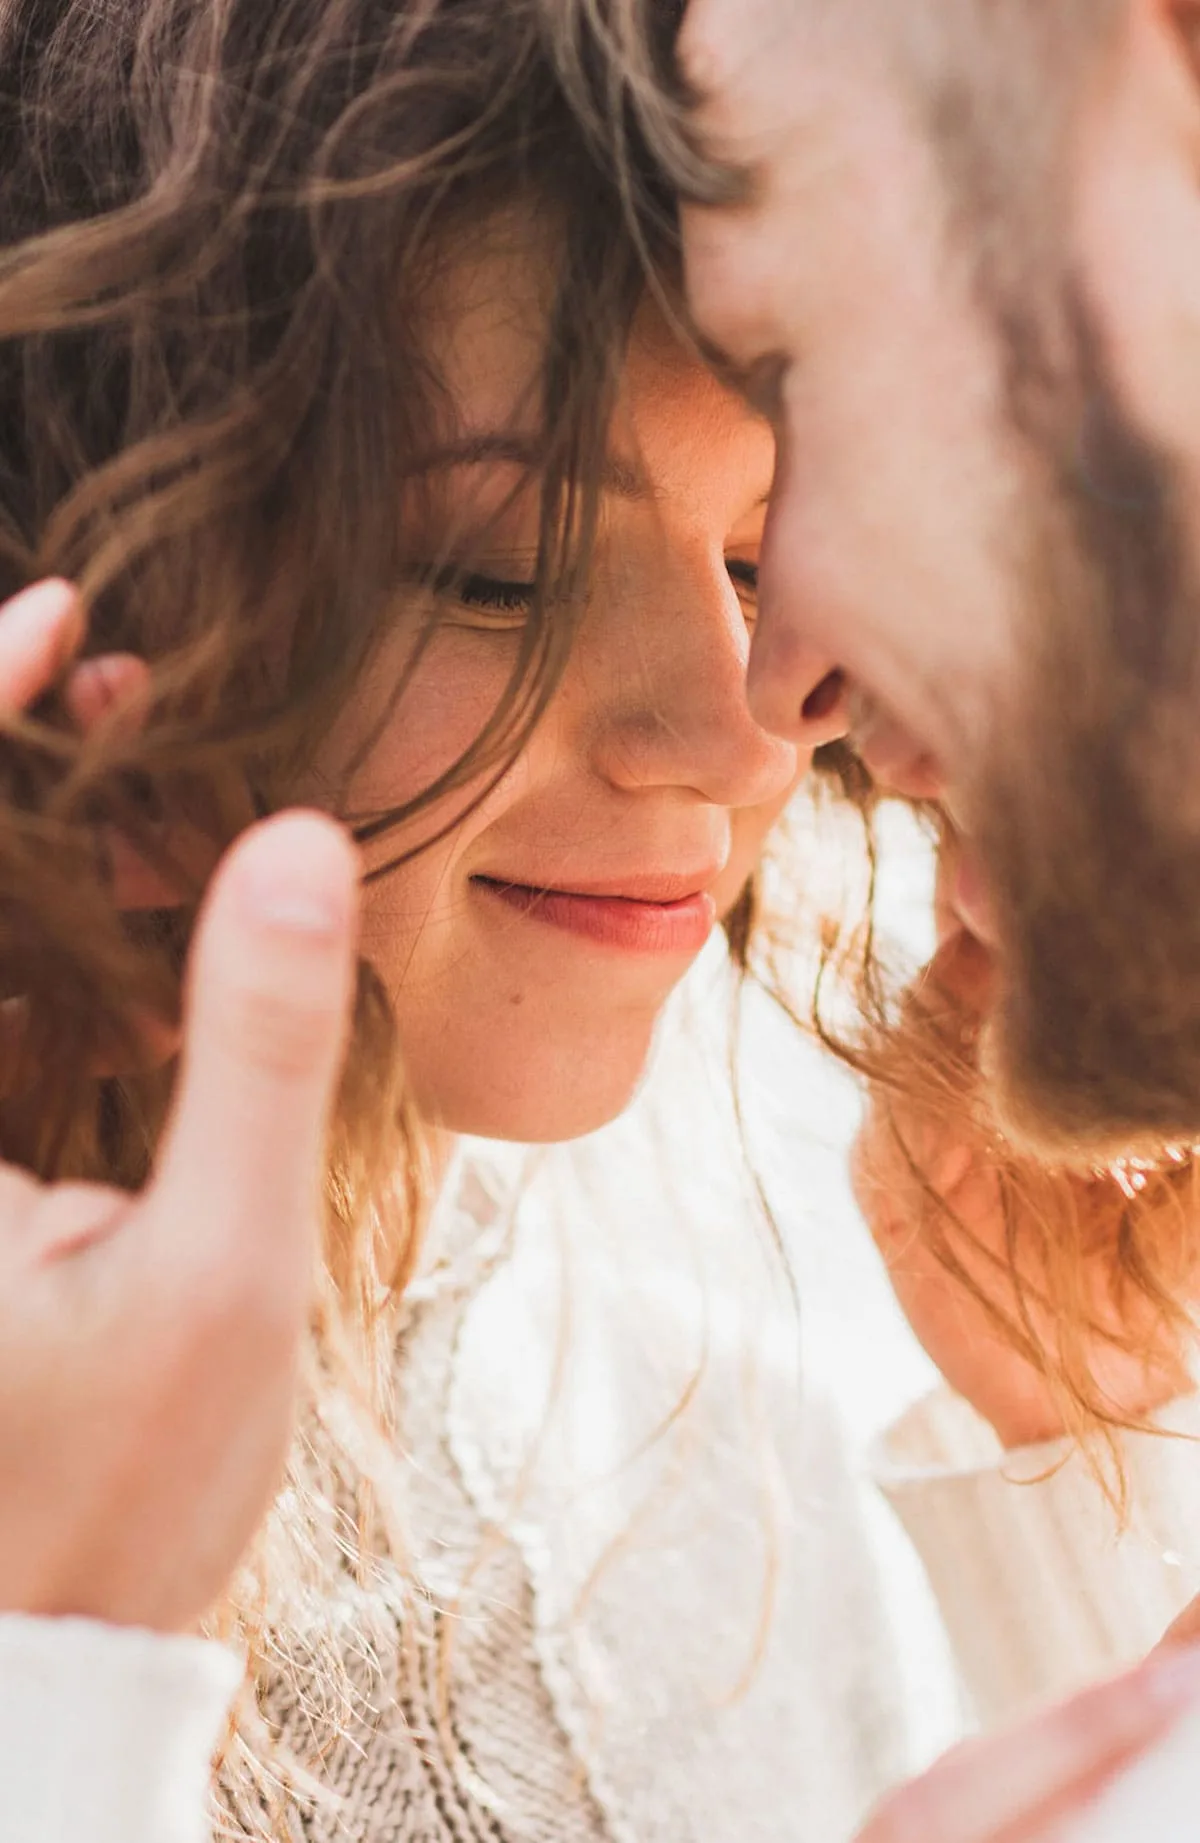 Humans are not naturally born knowing how to be married. How do we learn how to create a solid foundation for a long-lasting marriage? I've found there are common themes to build a happy marriage. Here are 11 essential requirements to build a strong marriage.